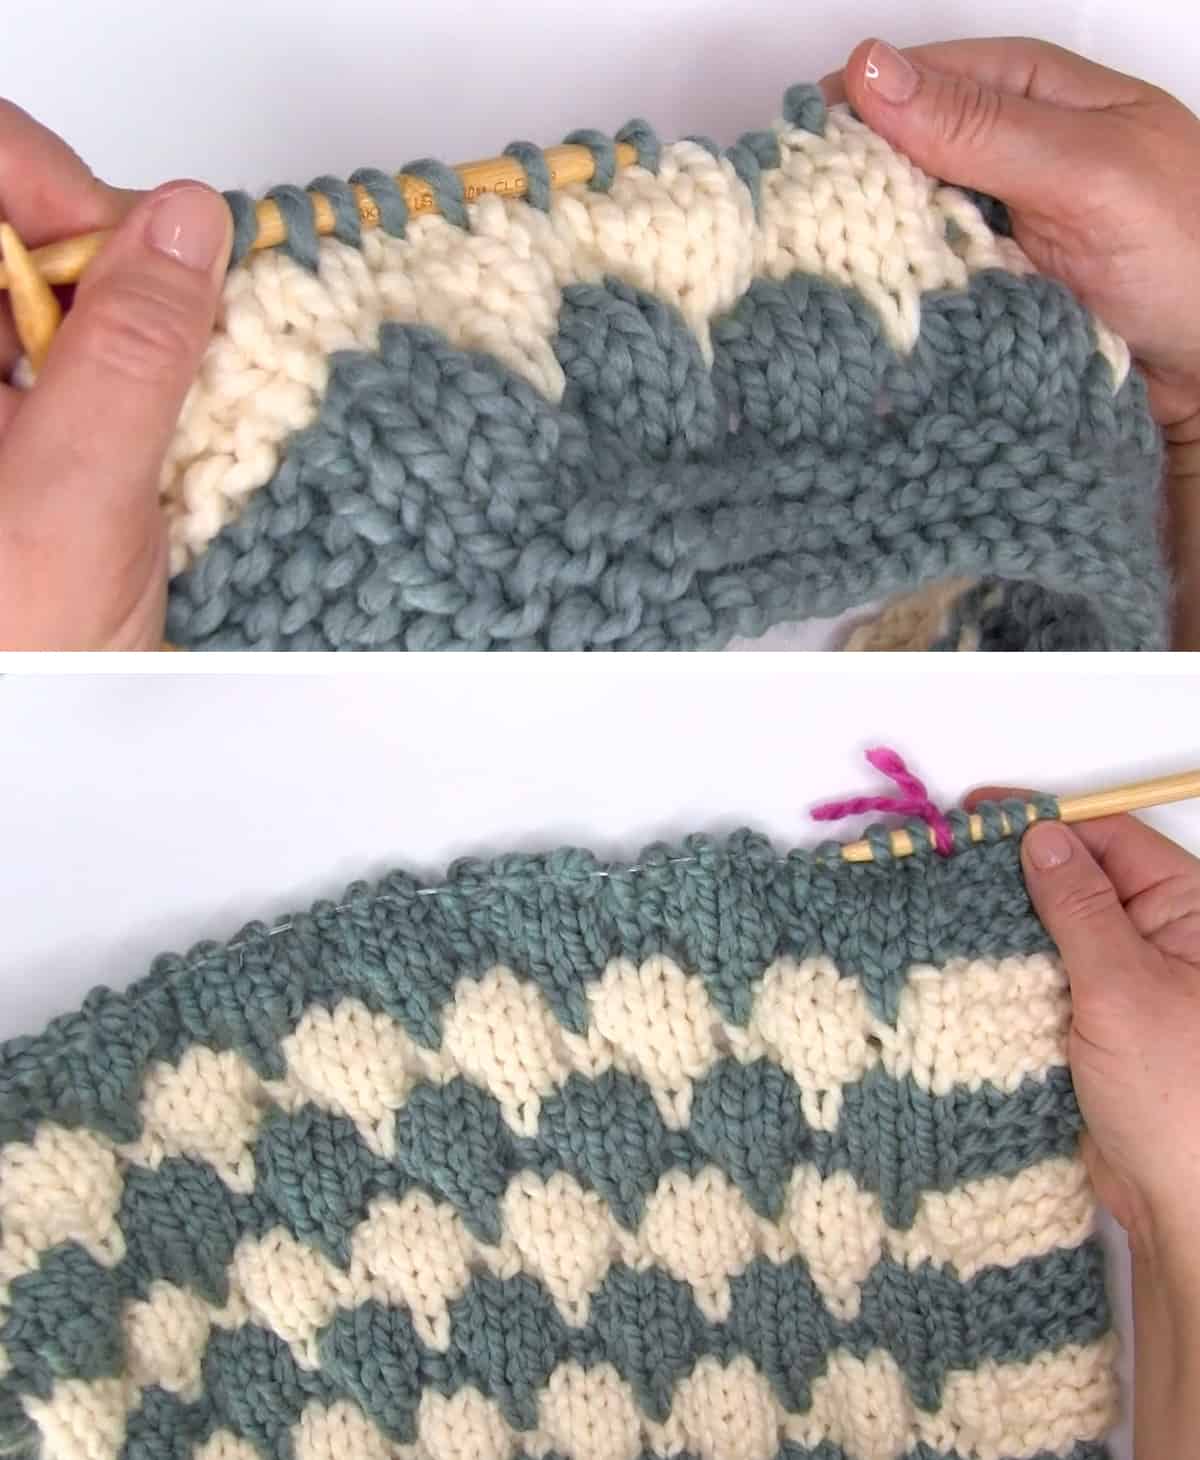 Knitting process of the bubble stitch in blue and cream color on a circular needle.